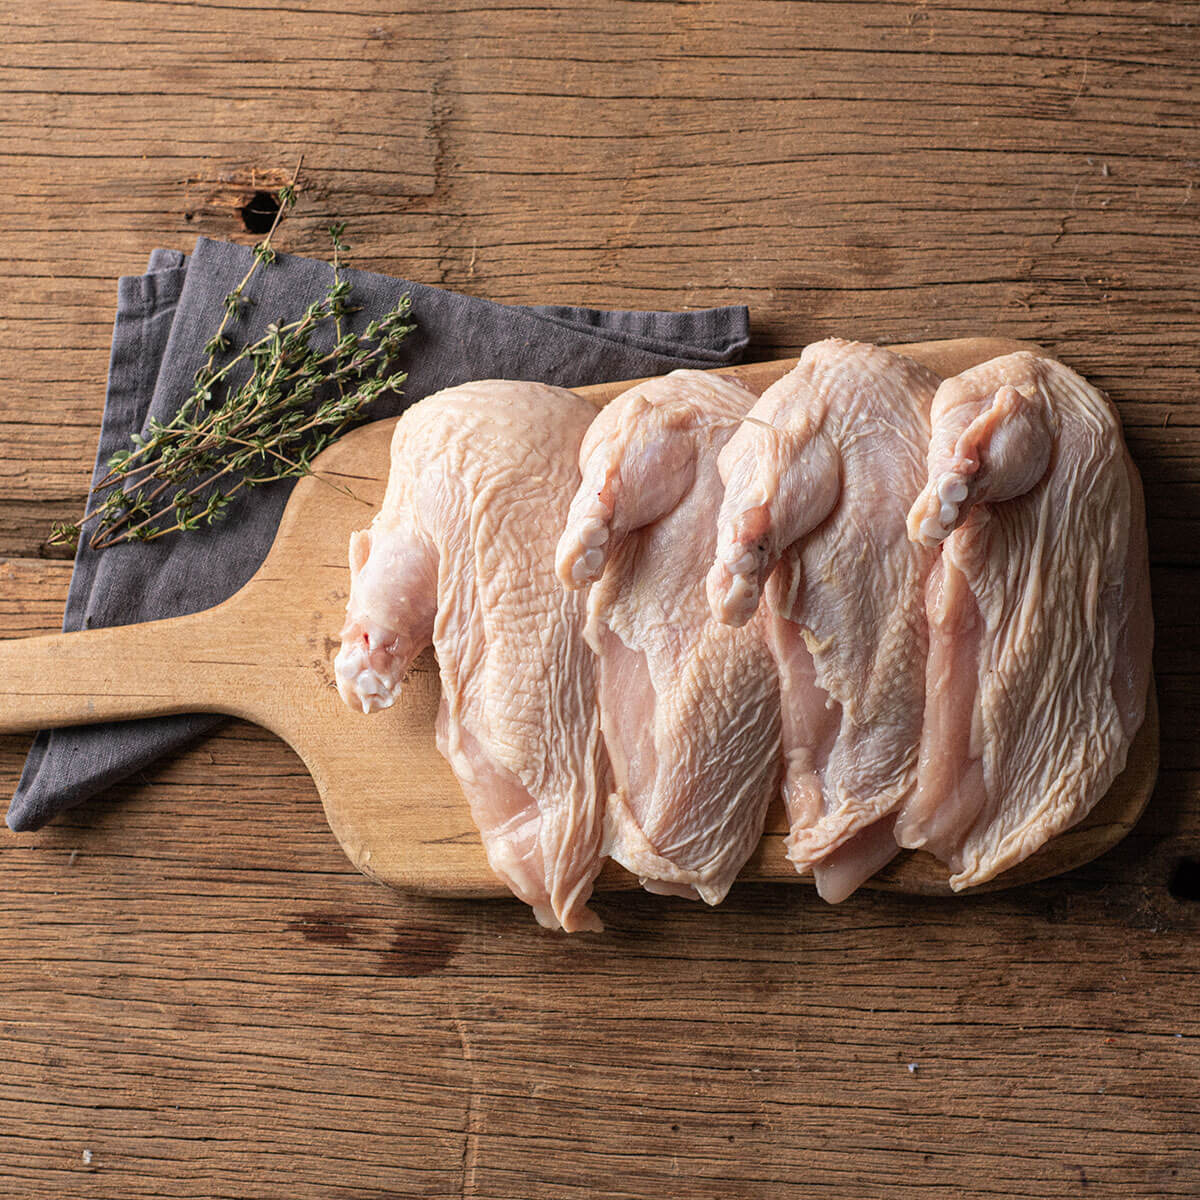 Special Offer - Free-Range Supreme Chicken Breasts - Buy 6, Get 2 Free